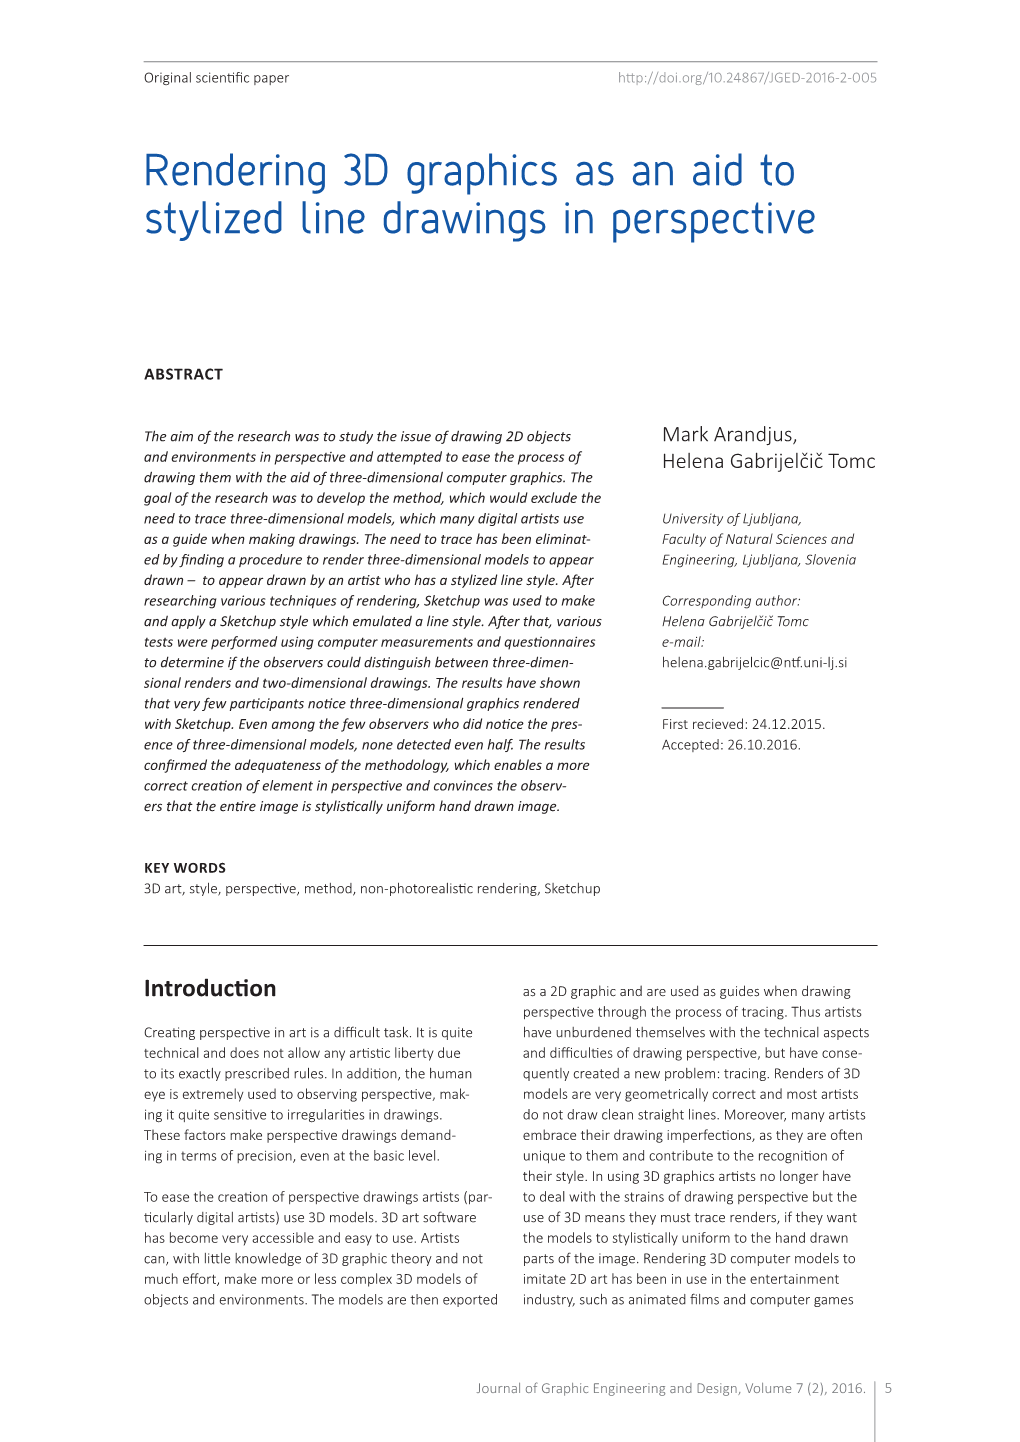 Rendering 3D Graphics As an Aid to Stylized Line Drawings in Perspective